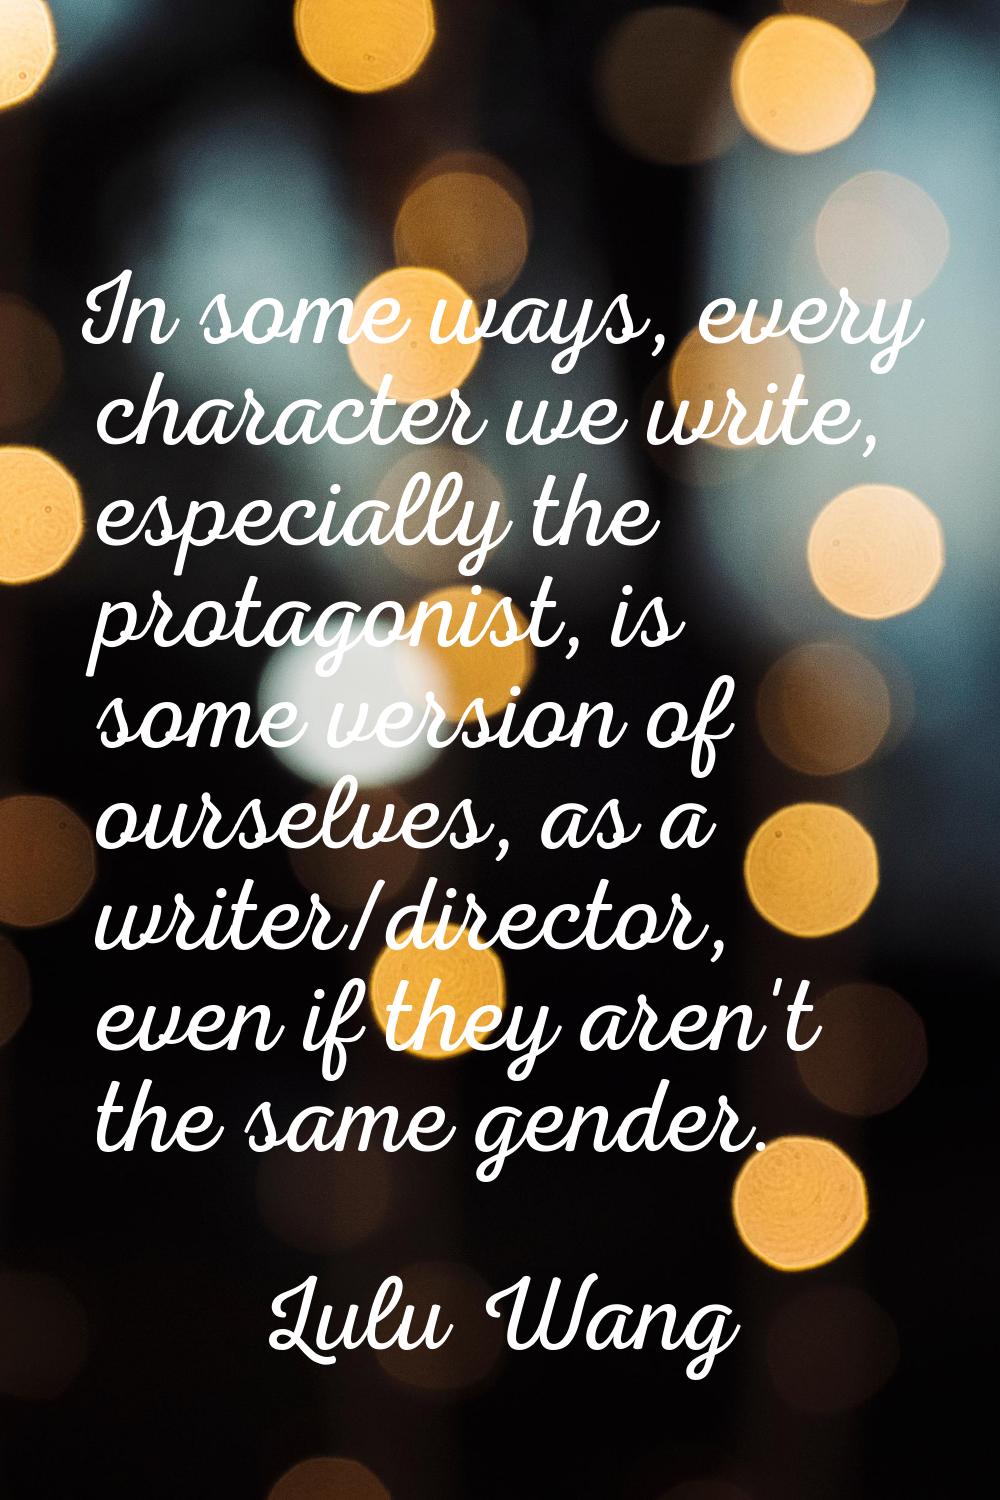 In some ways, every character we write, especially the protagonist, is some version of ourselves, a